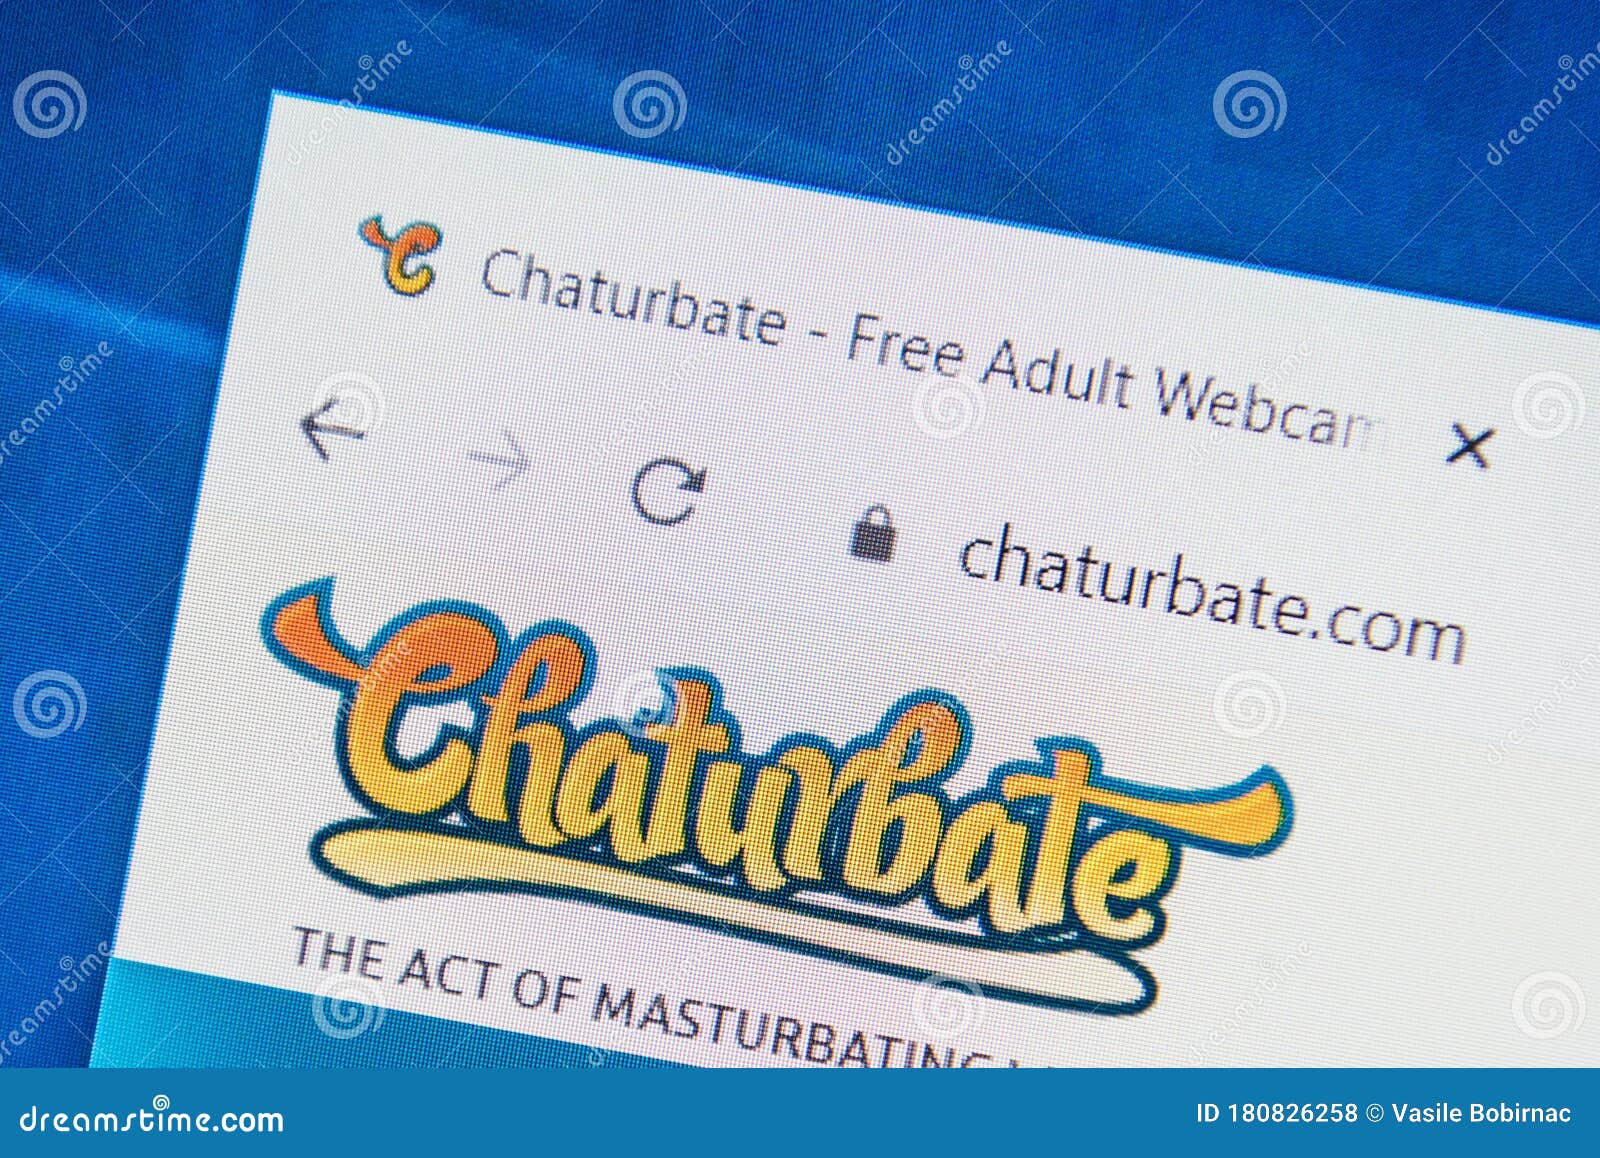 Extra On Chaturbate Hd